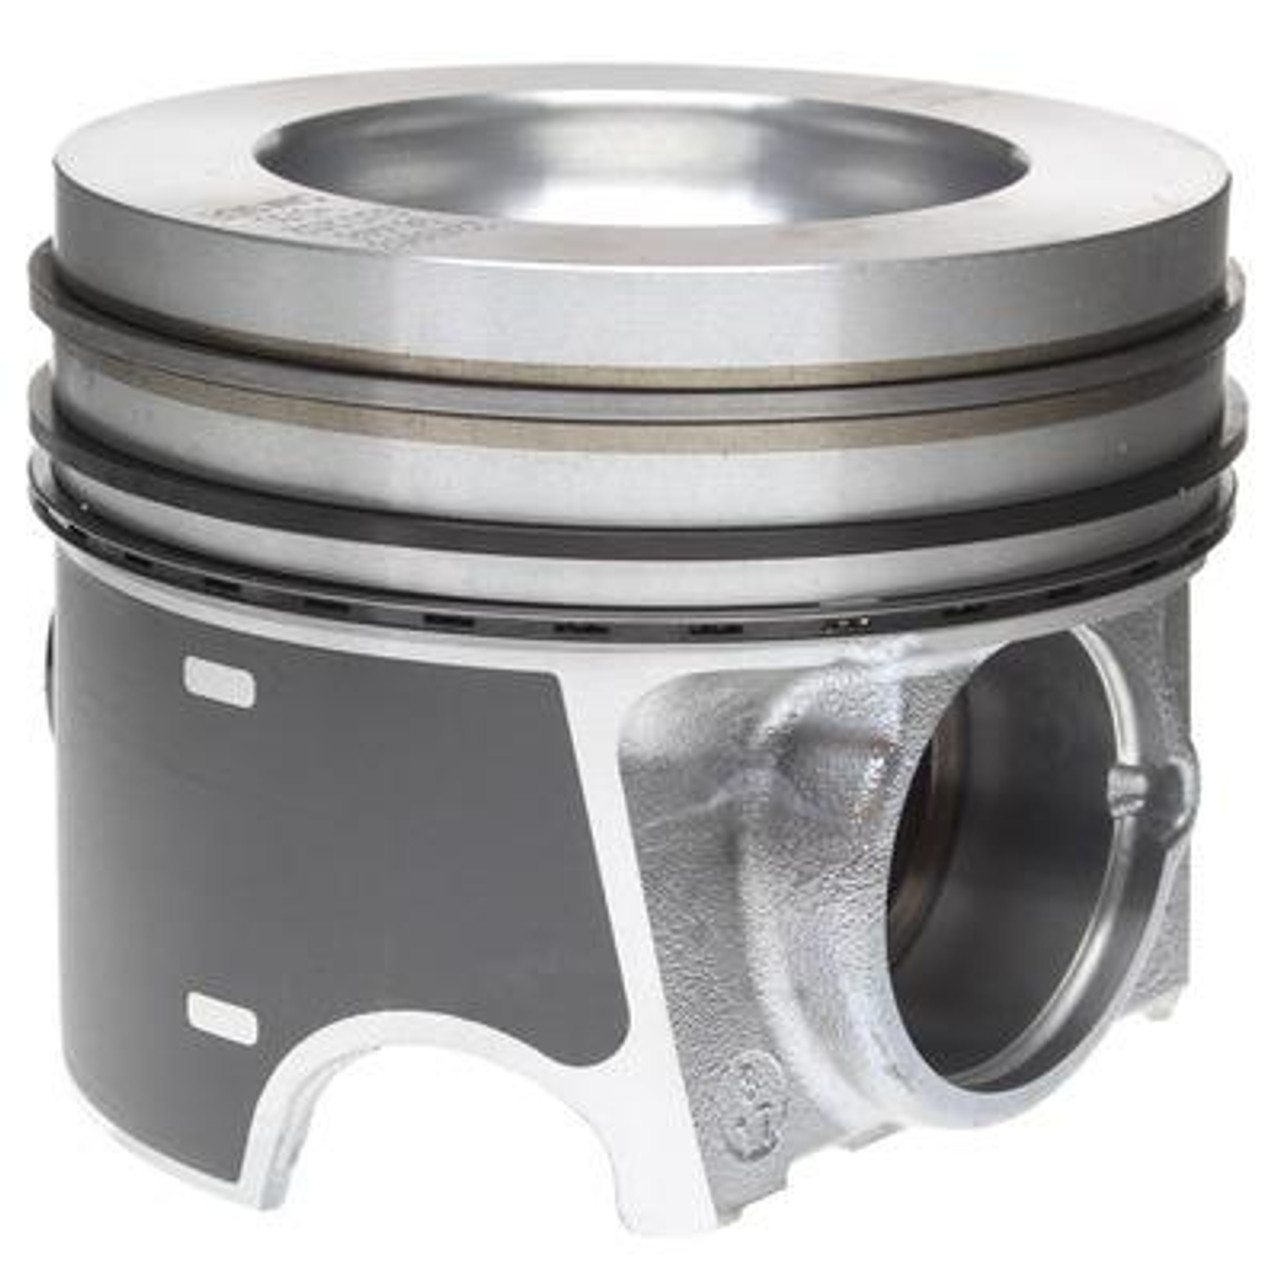 Mahle Piston With Rings (.50MM Reduced Compression) 2008 to 2010 6.4L Powerstroke | Navistar Maxx Force 7 (MCI224-3953WR-0.50)-Main View